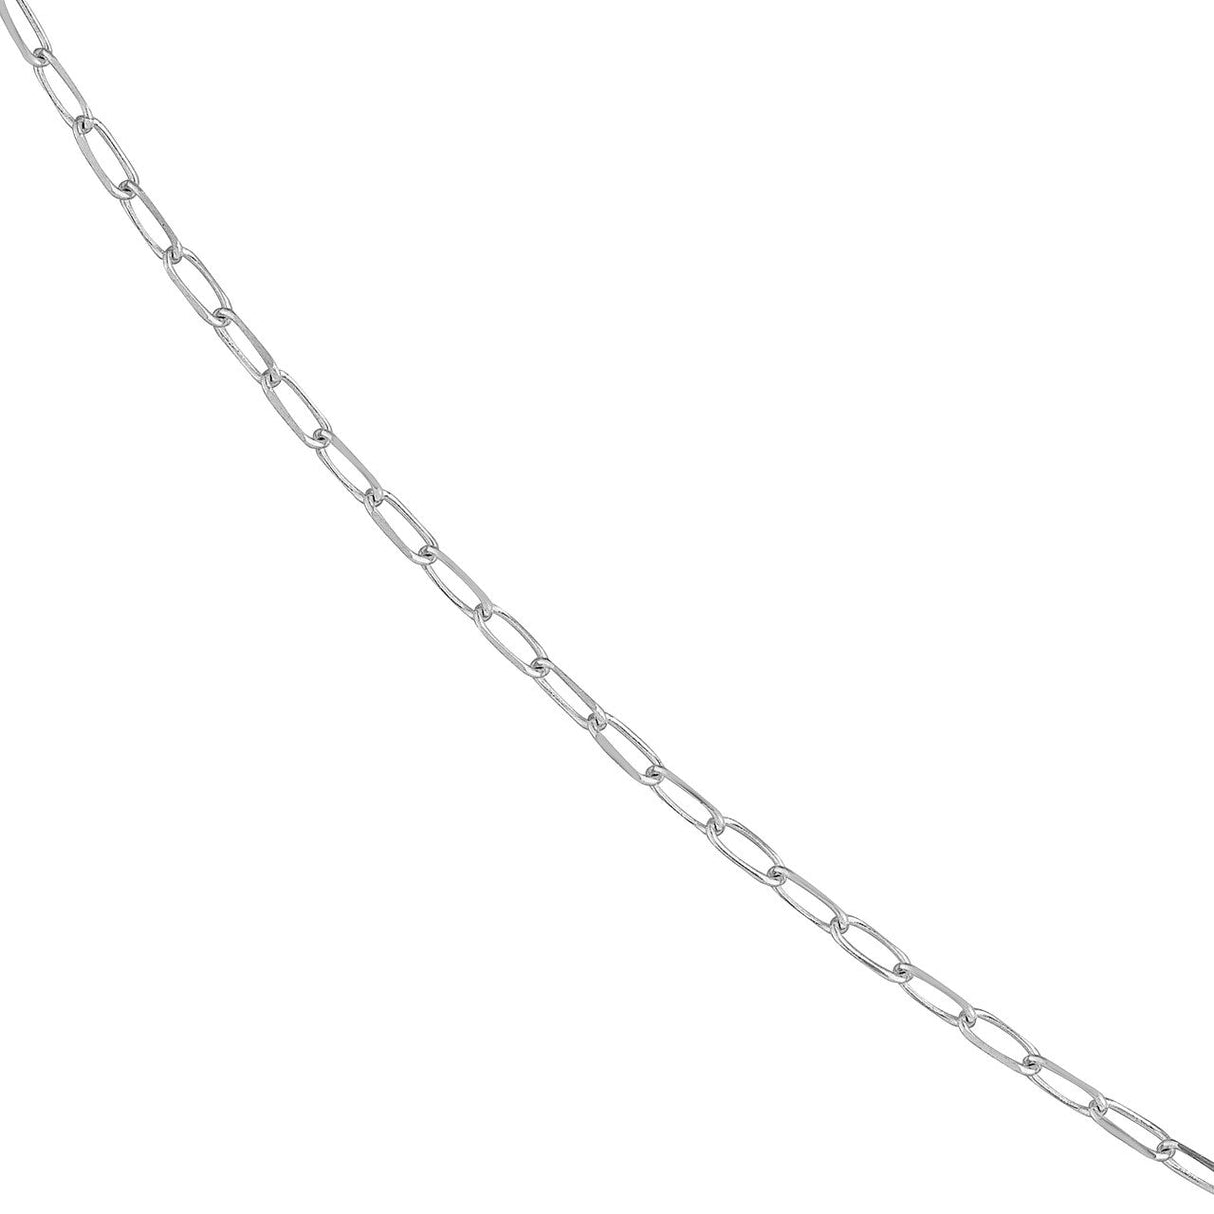 Indulge in the luxury of our 14K Gold Paper Clip Chain Necklace. Its fine craftsmanship and timeless design make it a perfect accessory for any occasion. With its secure lobster lock, this chain ensures both style and peace of mind